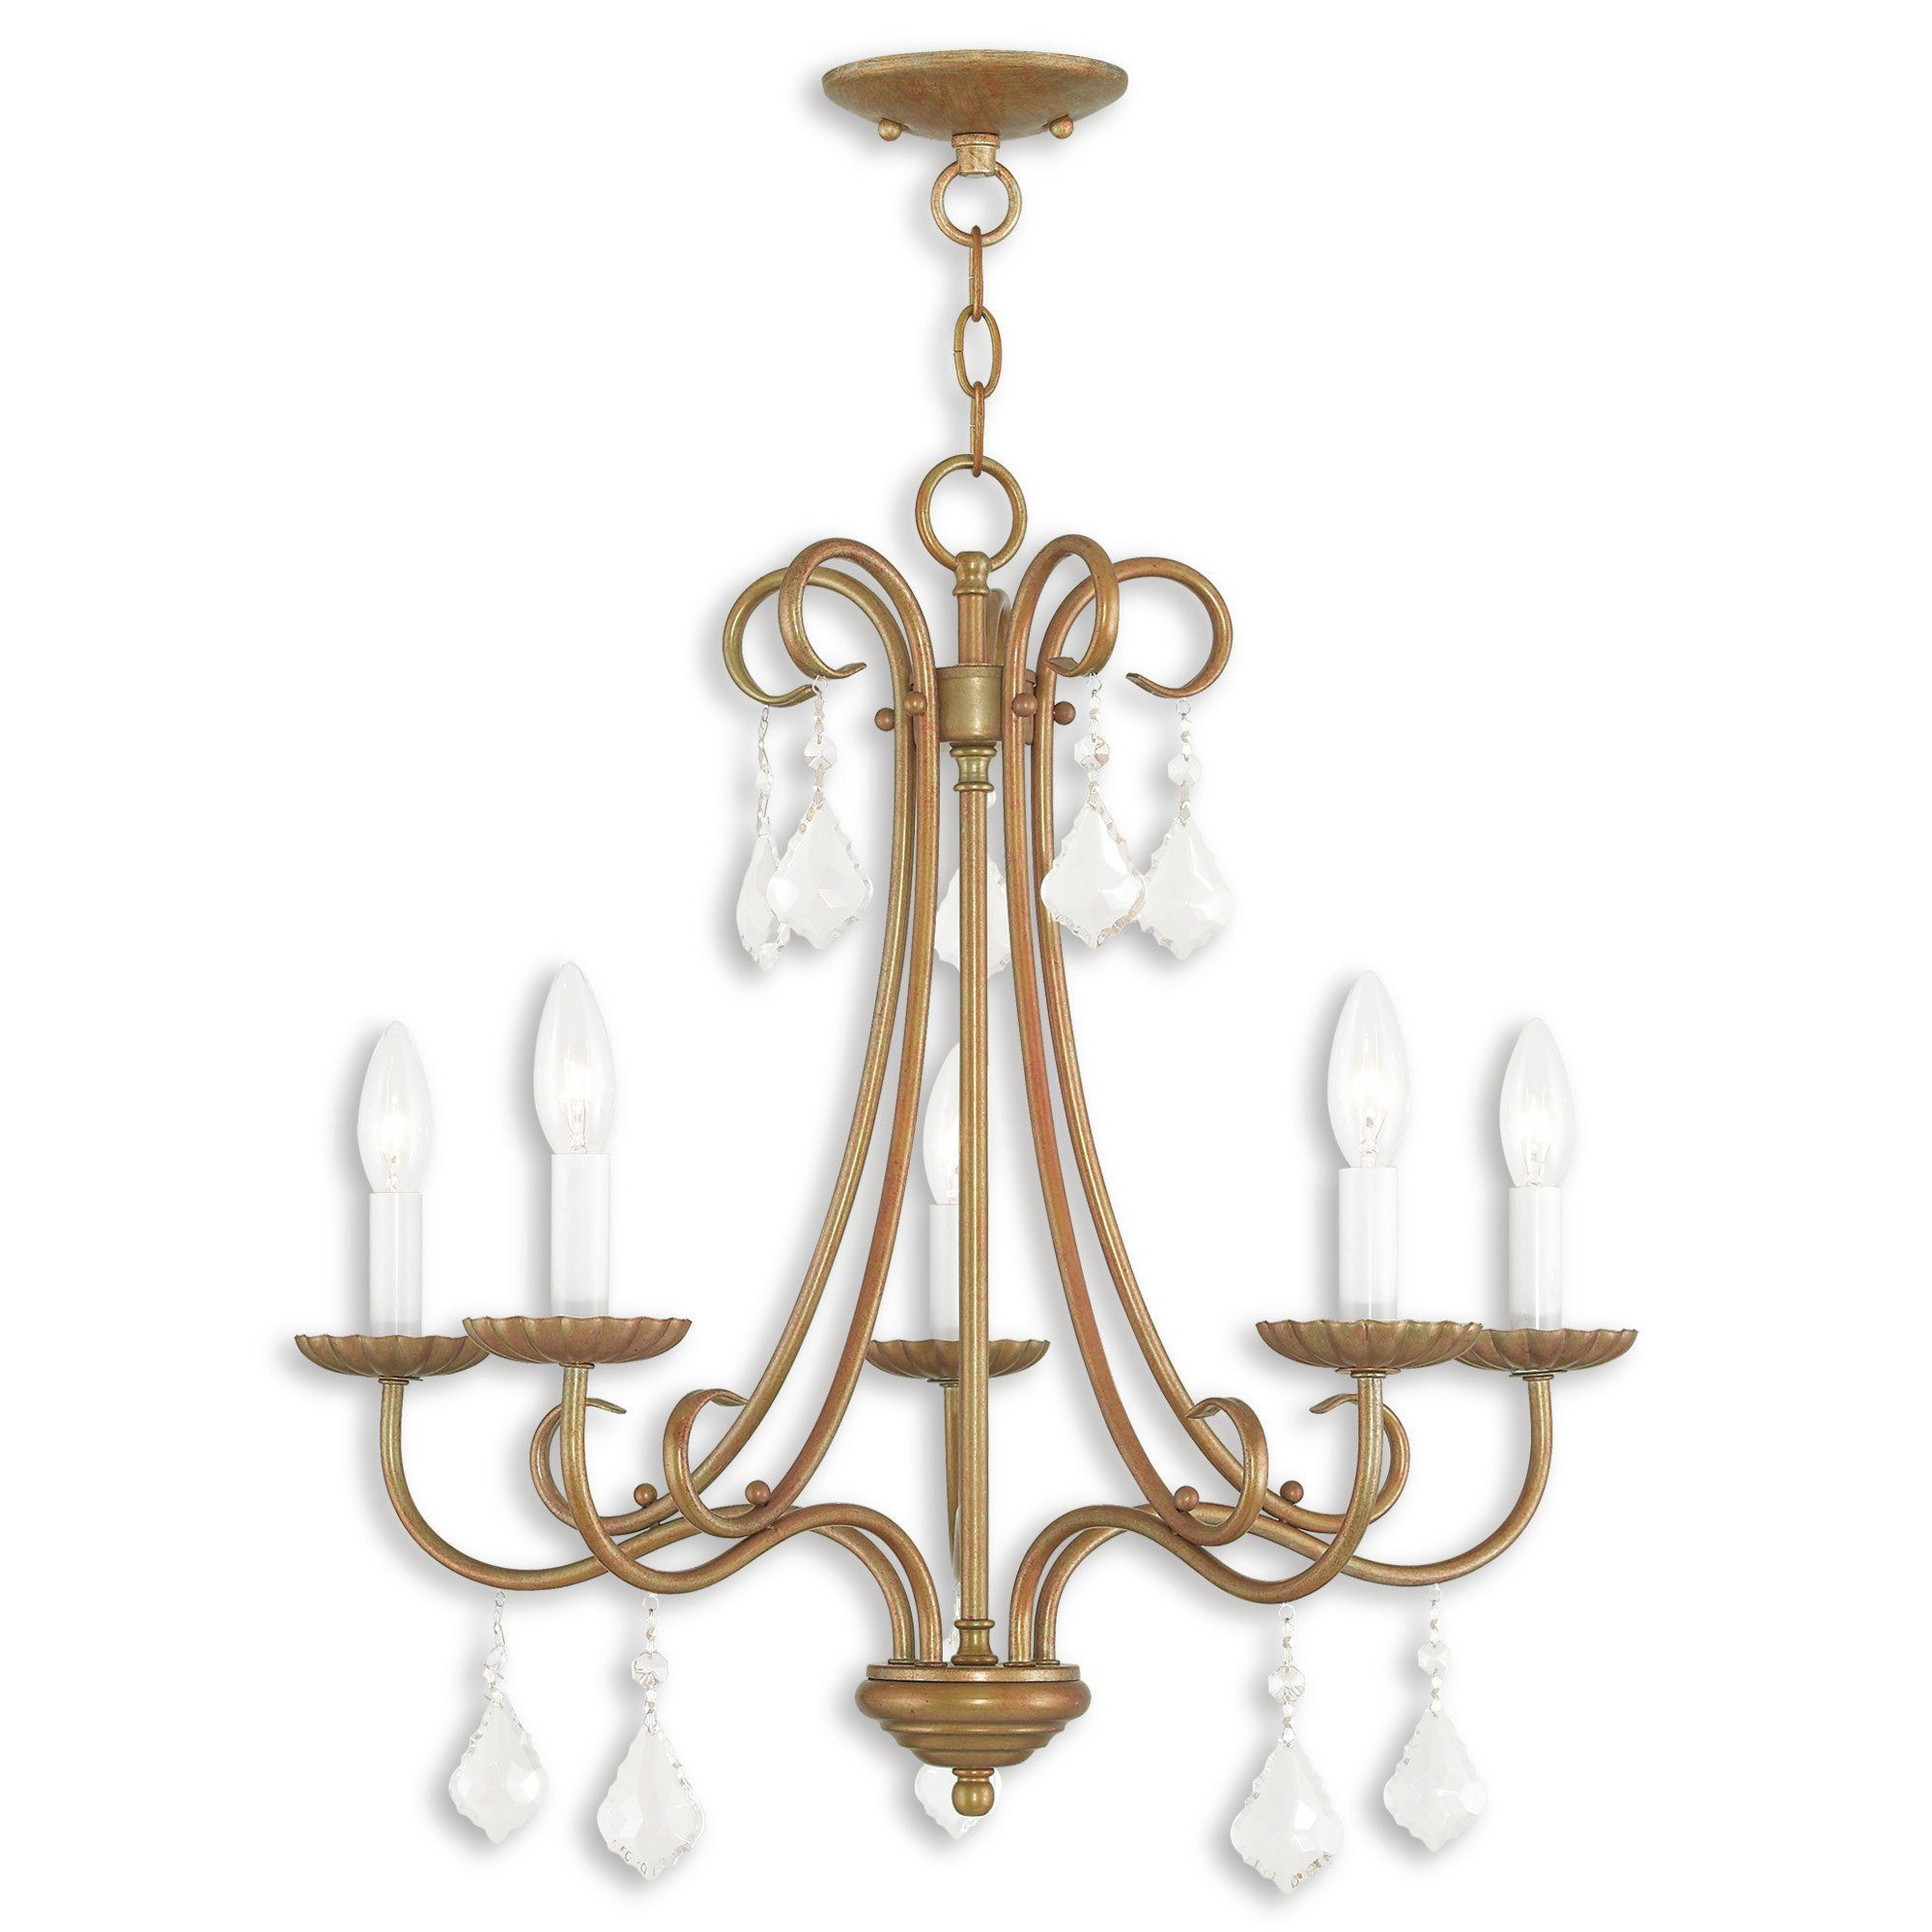 Preferred Blanchette 5 Light Candle Style Chandeliers Regarding Devan 5 Light Candle Style Chandelier (View 18 of 25)